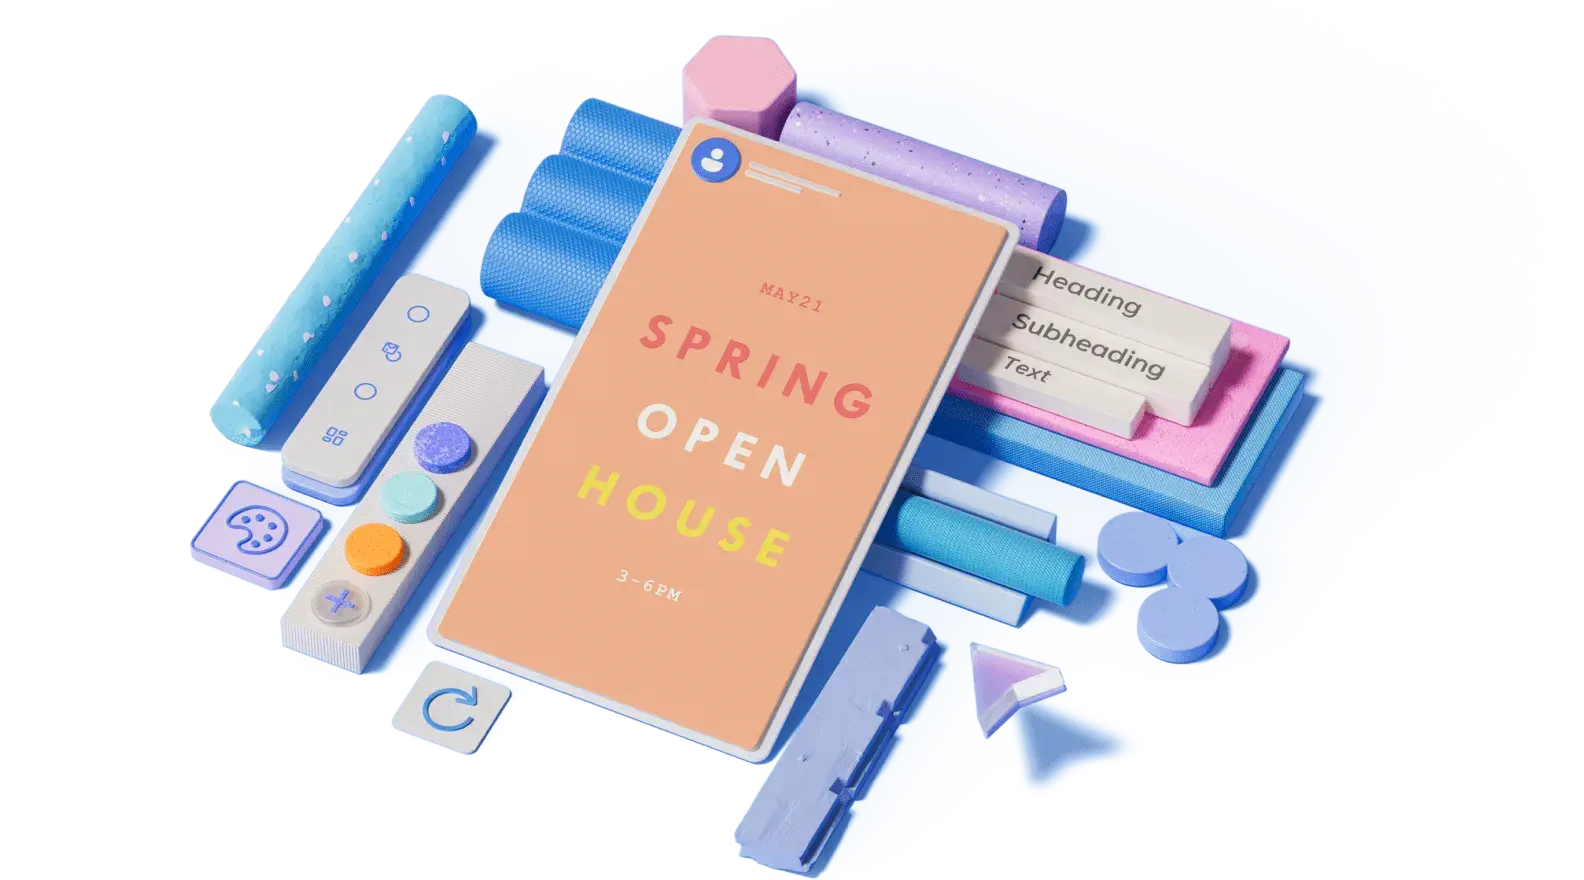 Spring open house template surrounded by 3D illustrated design elements